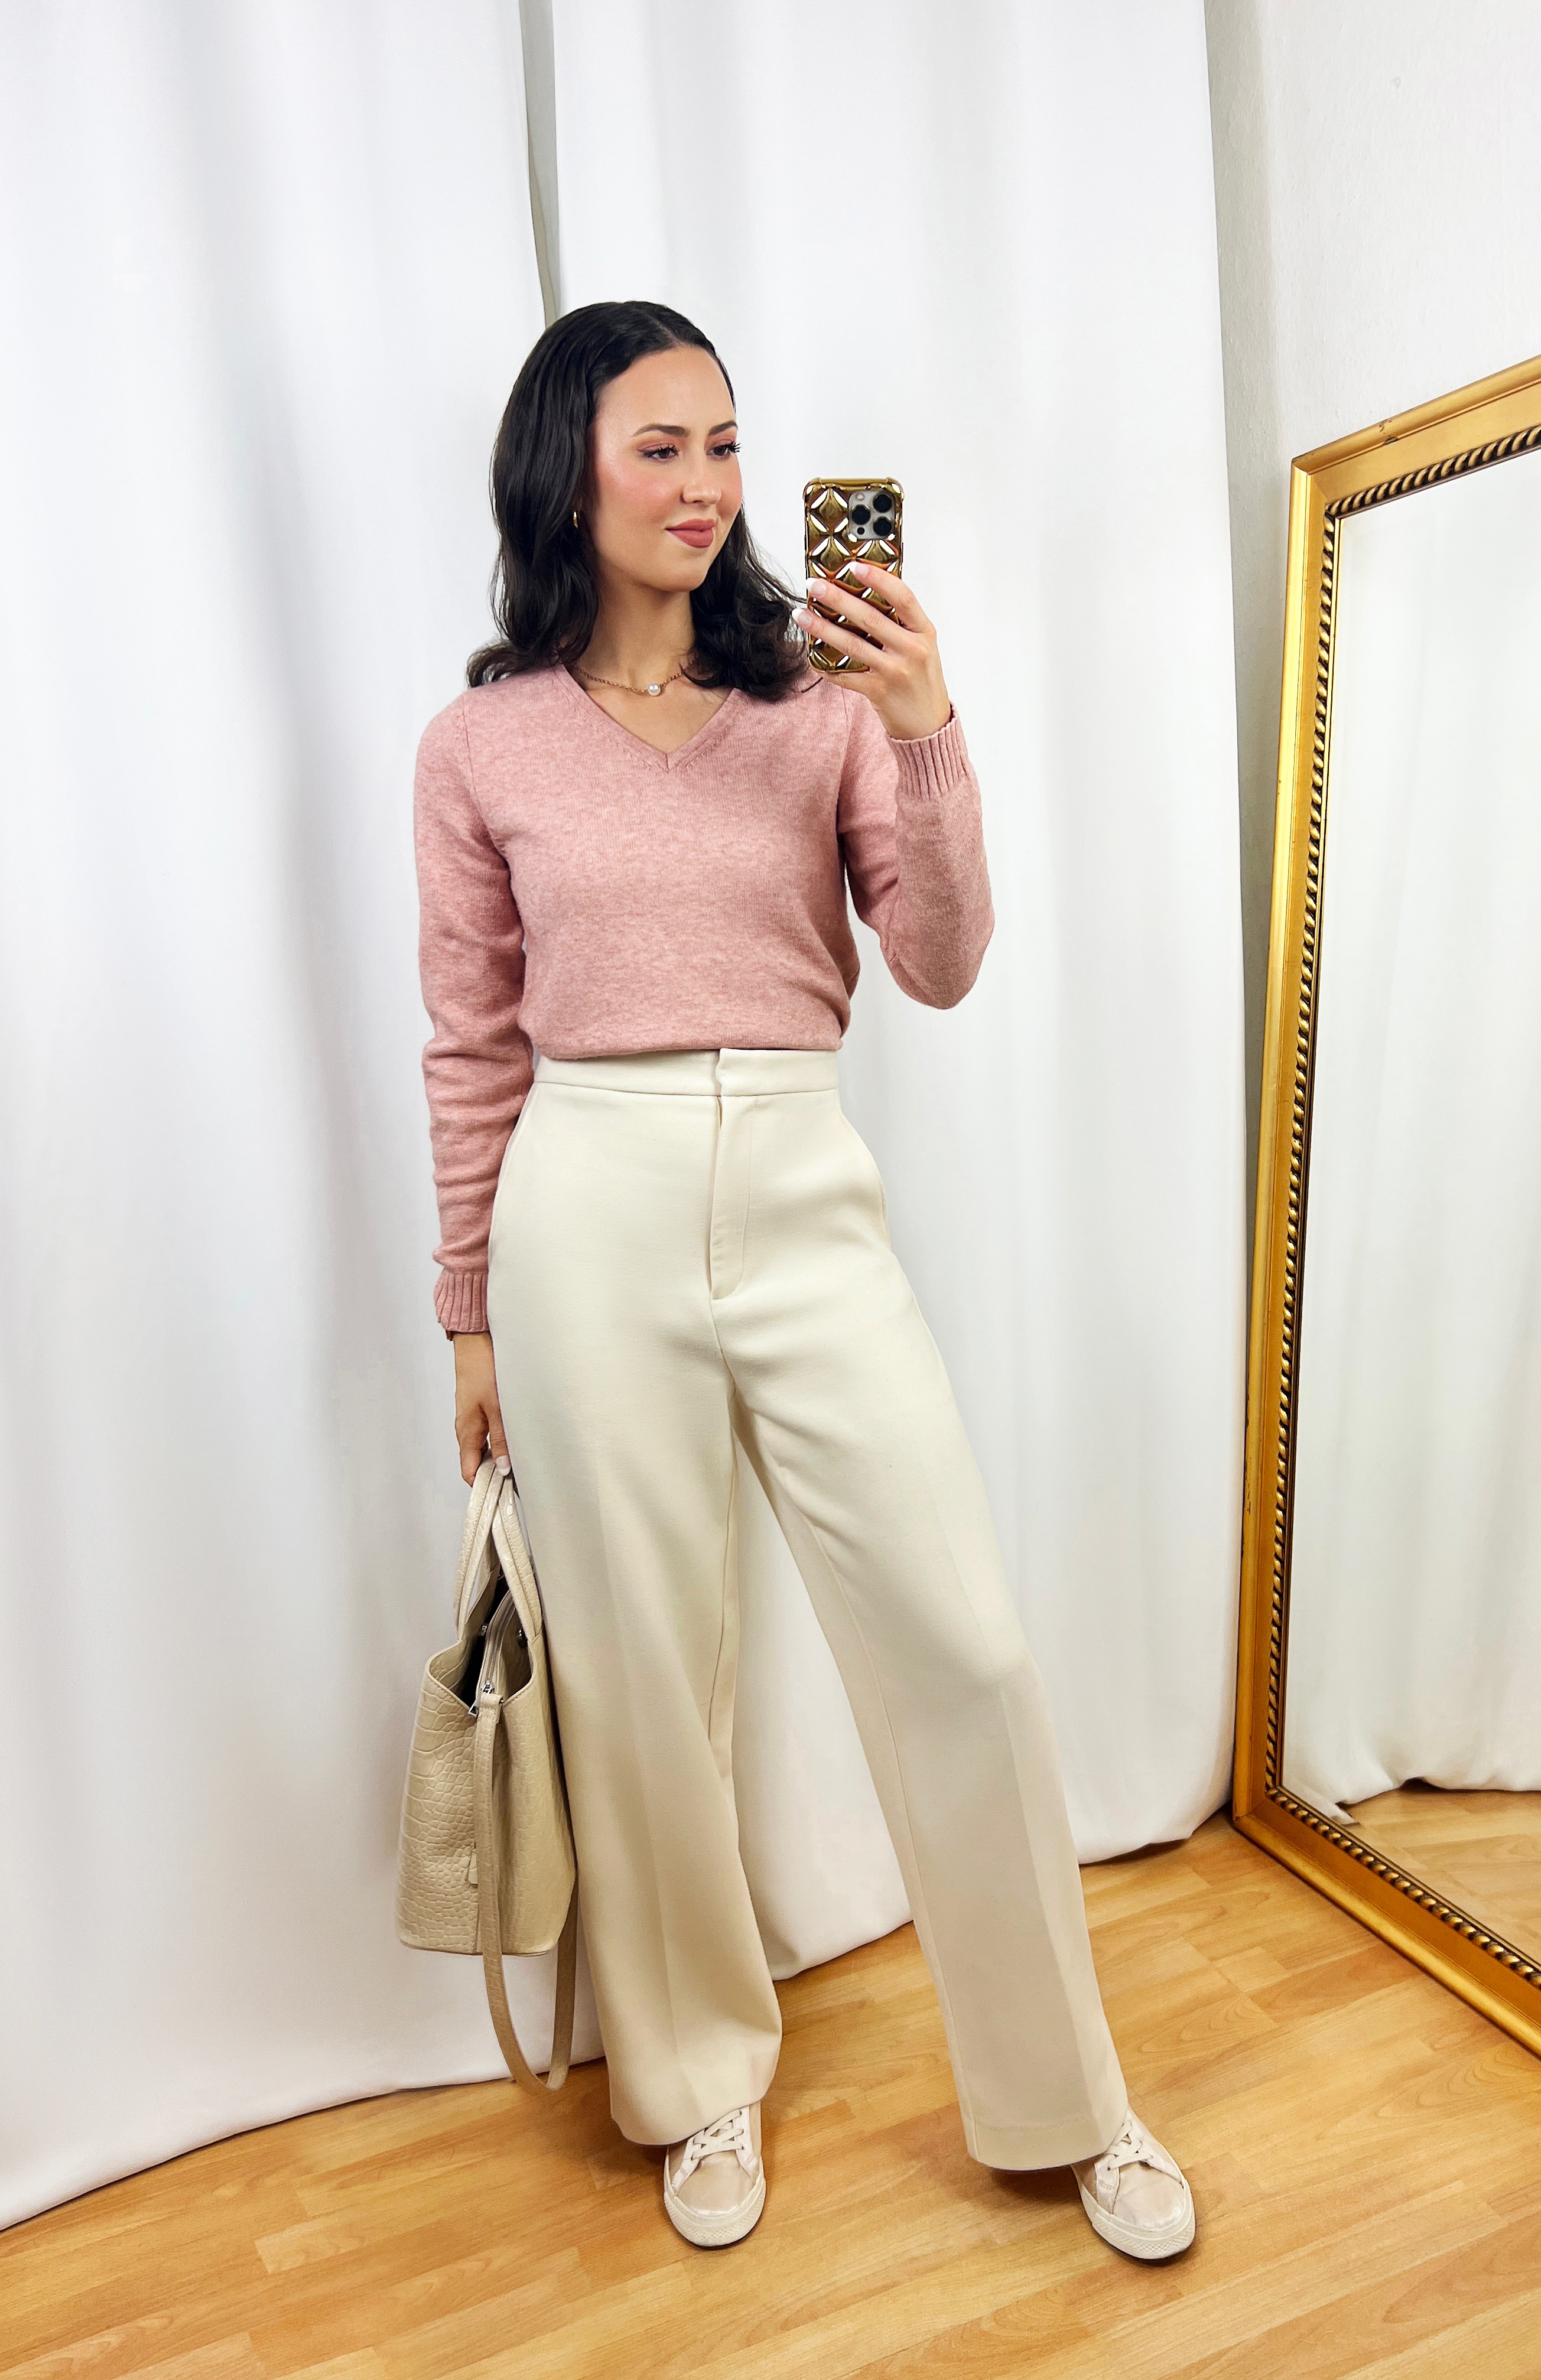 Dusty Peach Sweater Outfit